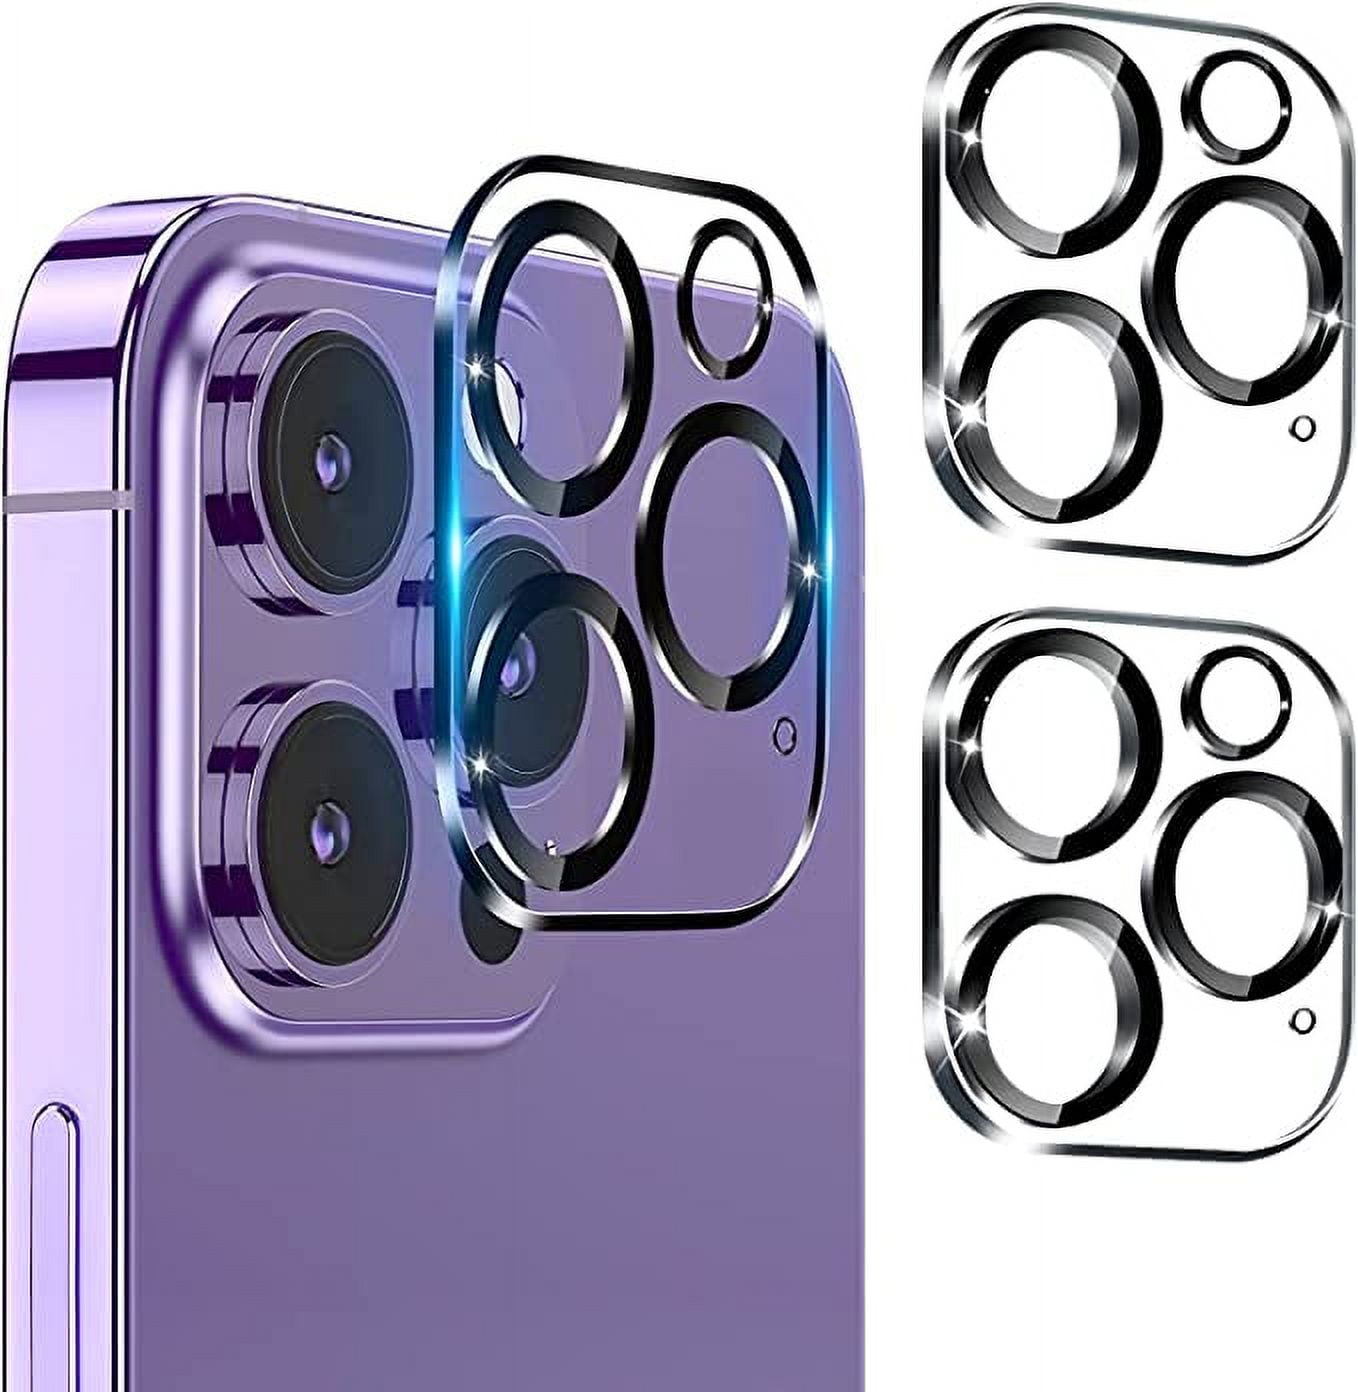 Apple Camera Protectoriphone 13/14 Pro Max Luminous Side Skin With Camera  Protector & Screen Cover